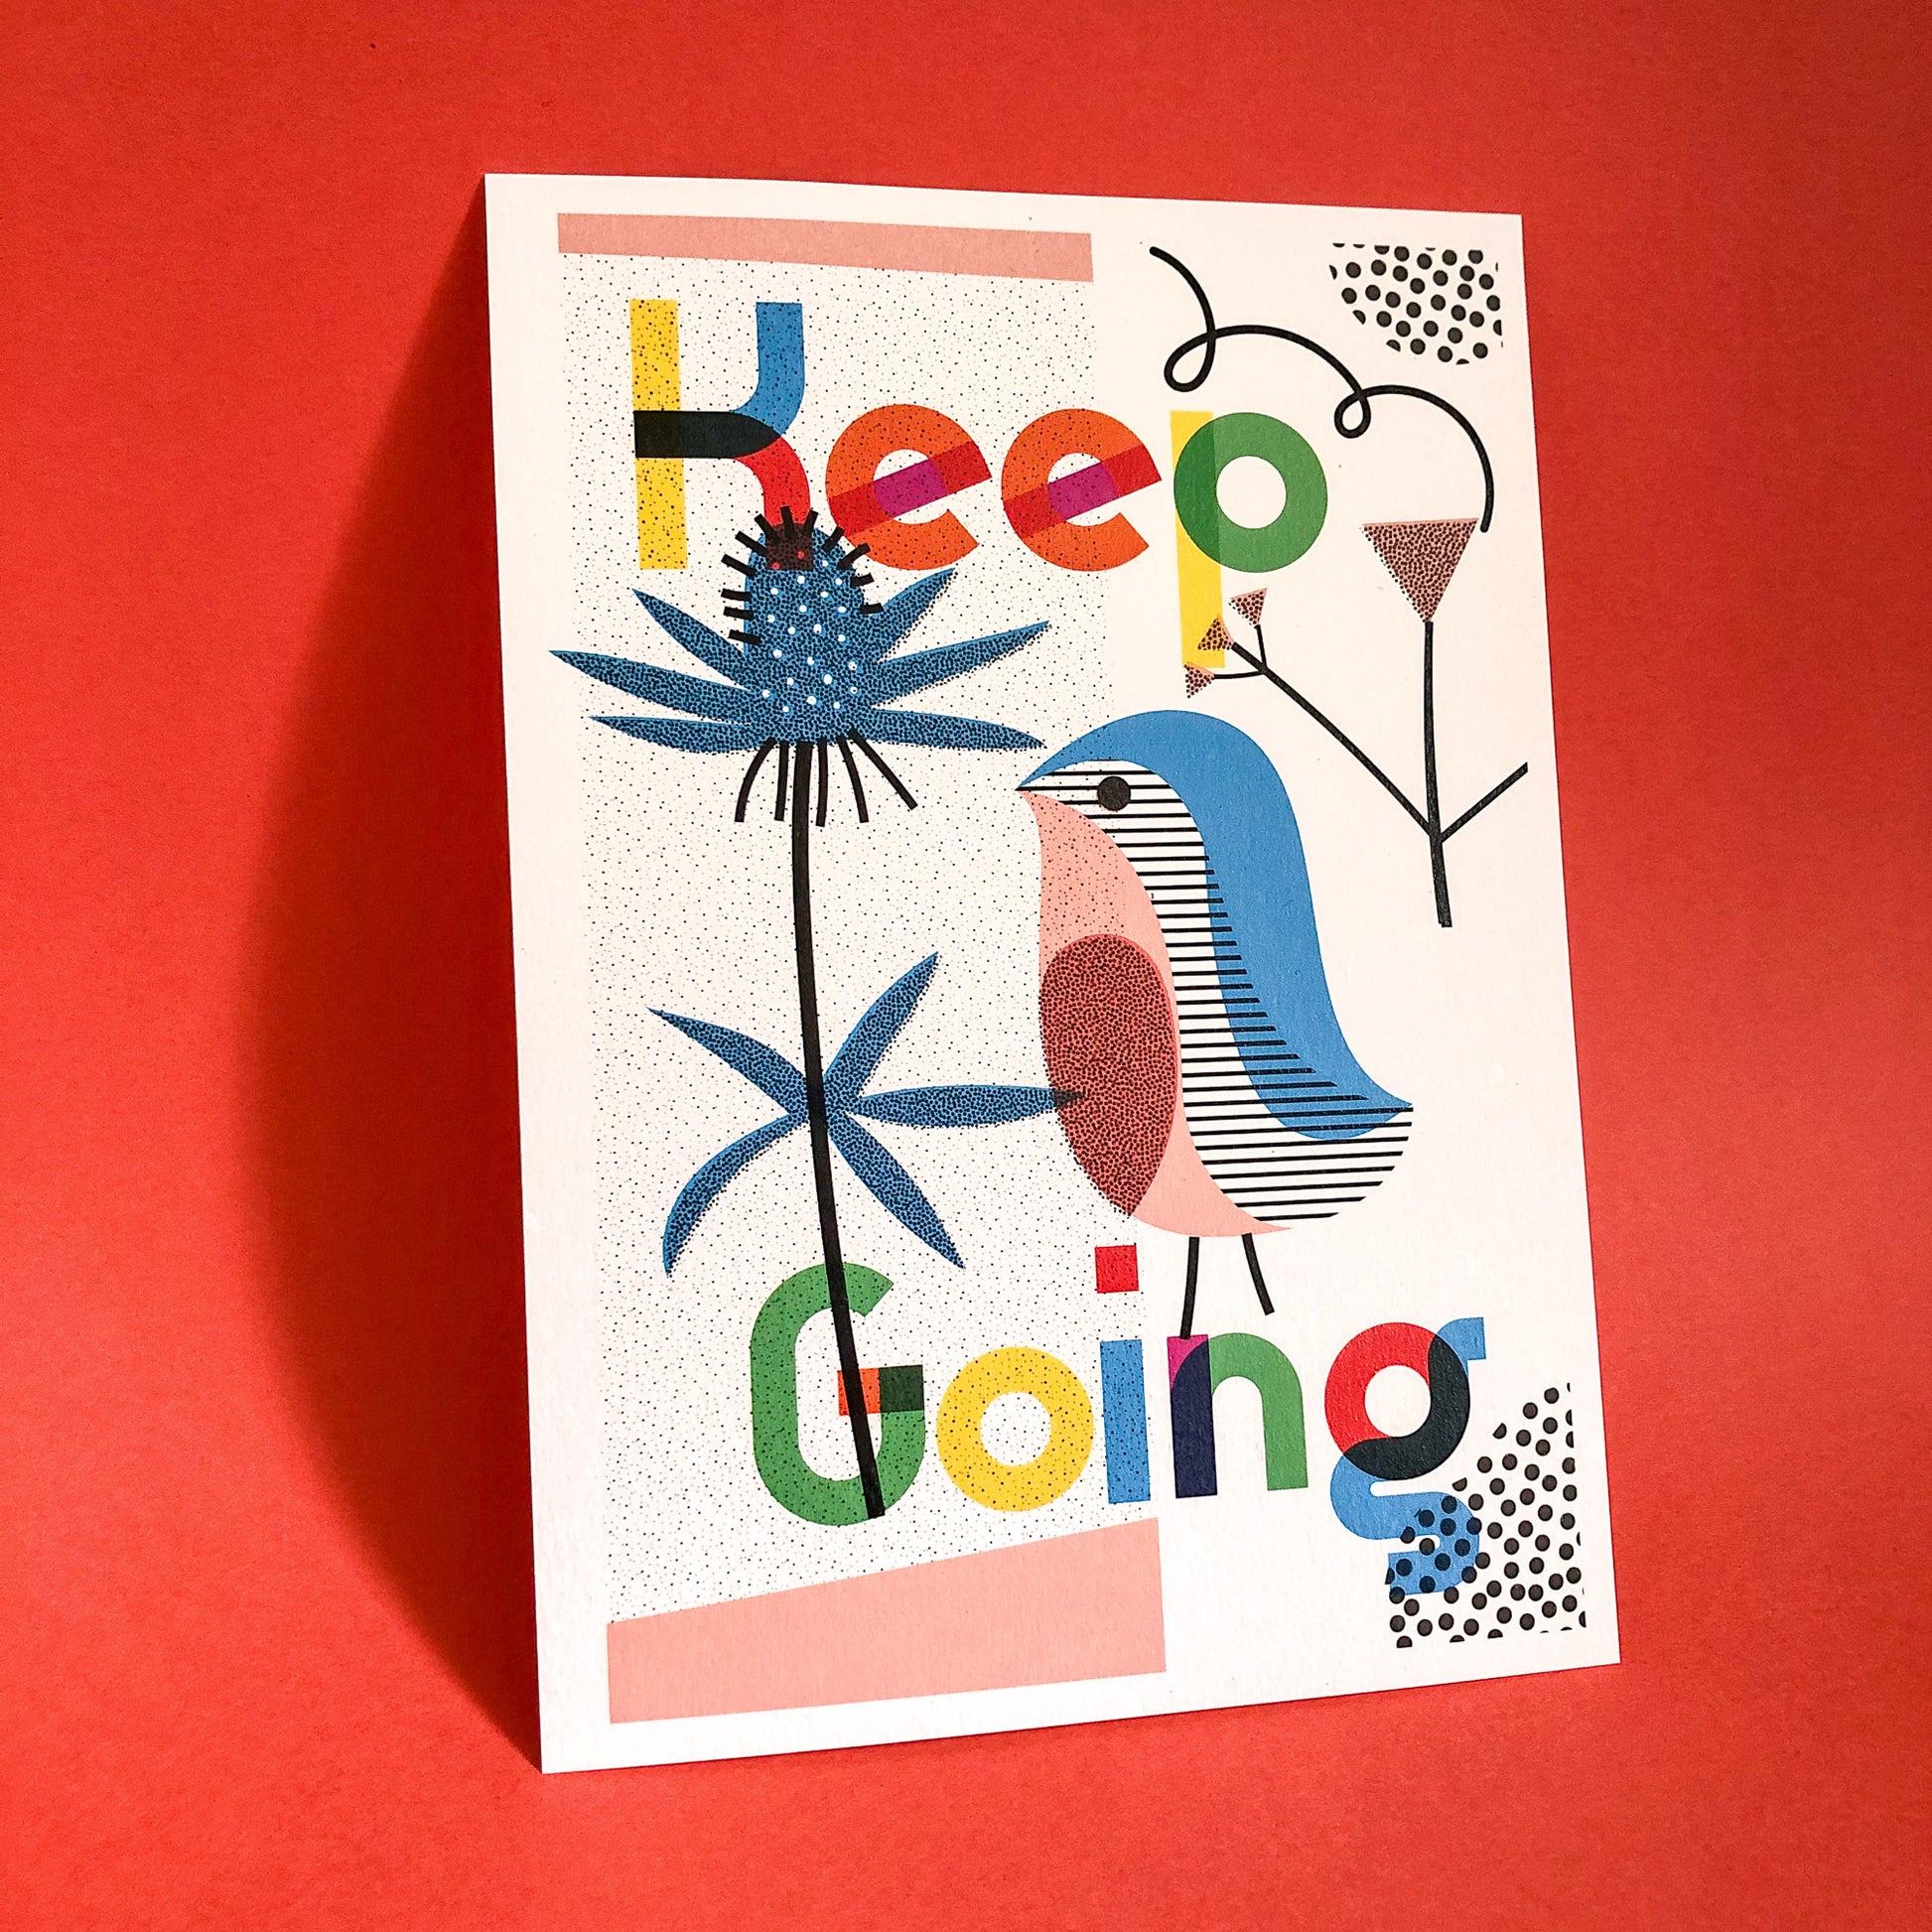 A4 Keep Going Art Print by The Print Lass. Shown unframed on a red background